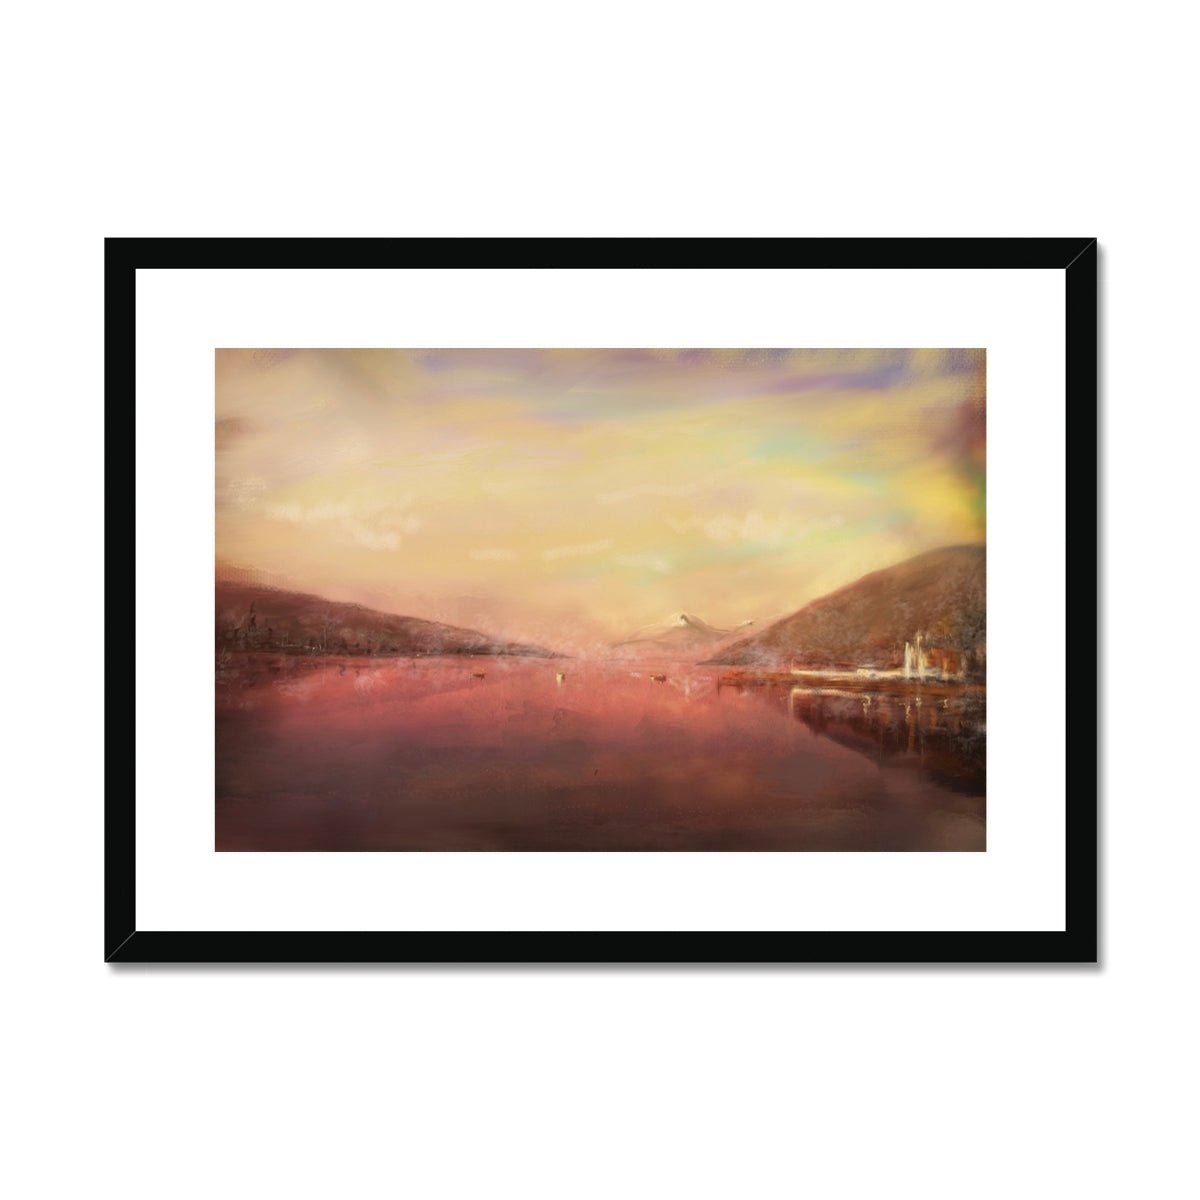 Loch Tay Painting | Framed & Mounted Prints From Scotland-Framed & Mounted Prints-Scottish Lochs & Mountains Art Gallery-A2 Landscape-Black Frame-Paintings, Prints, Homeware, Art Gifts From Scotland By Scottish Artist Kevin Hunter